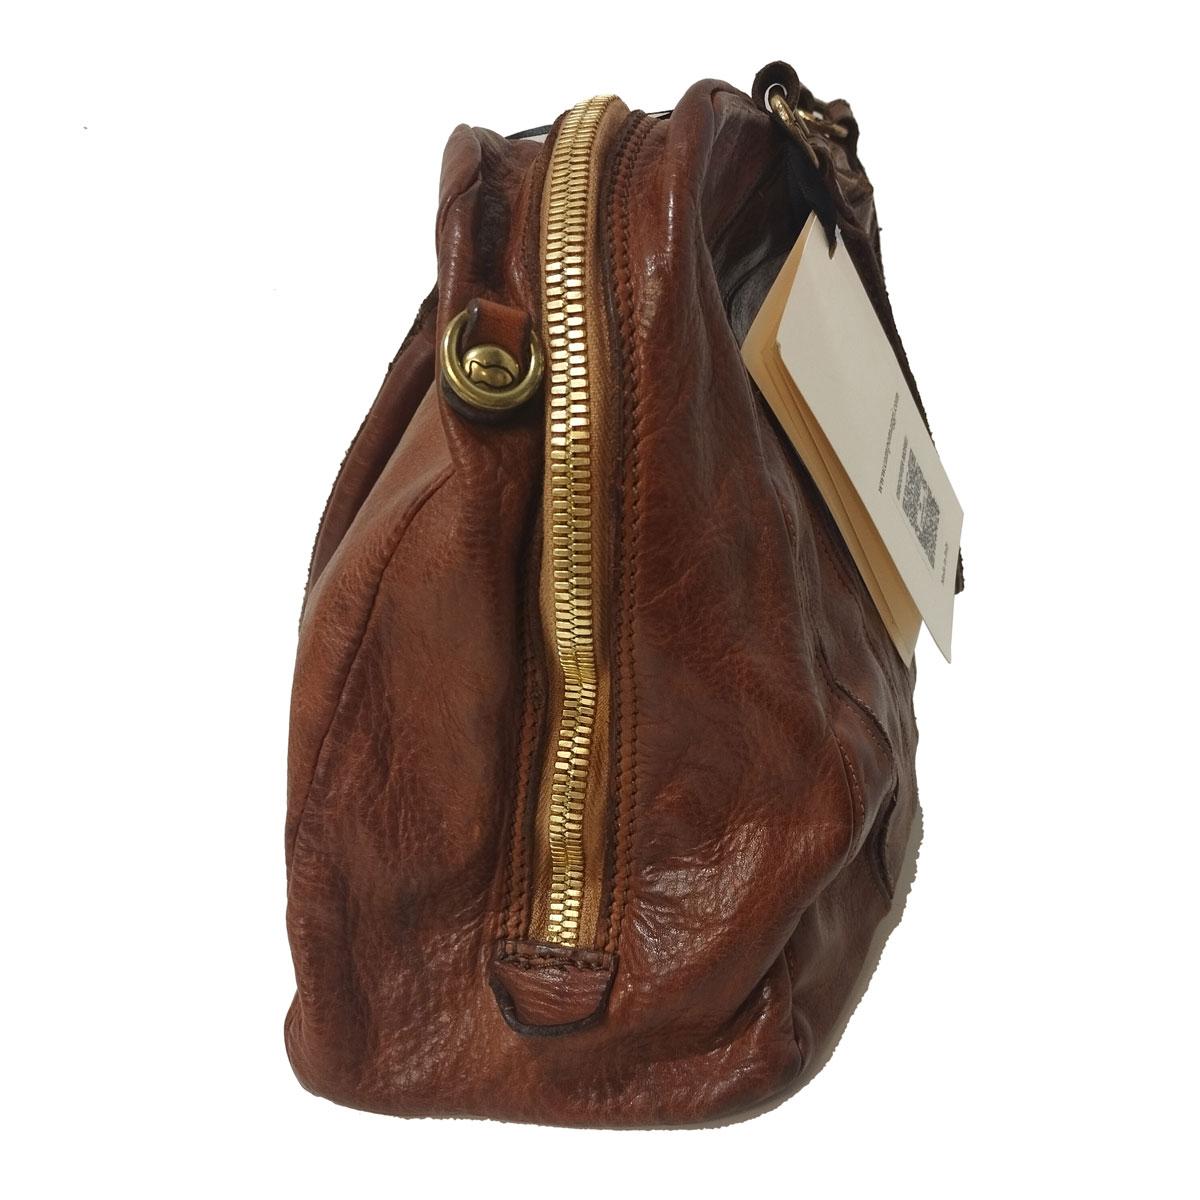 Beautiful and easy to wear italian manufactured bag
Leather bag from Campomaggi Italy
Cognac color
Spiral pattern
Double handle
Can be carried crossbody
Zip closure
Internal zip pocket and phone holder
Cm 37 x 25 x 11 (14,5 x 9,84 x 4,33